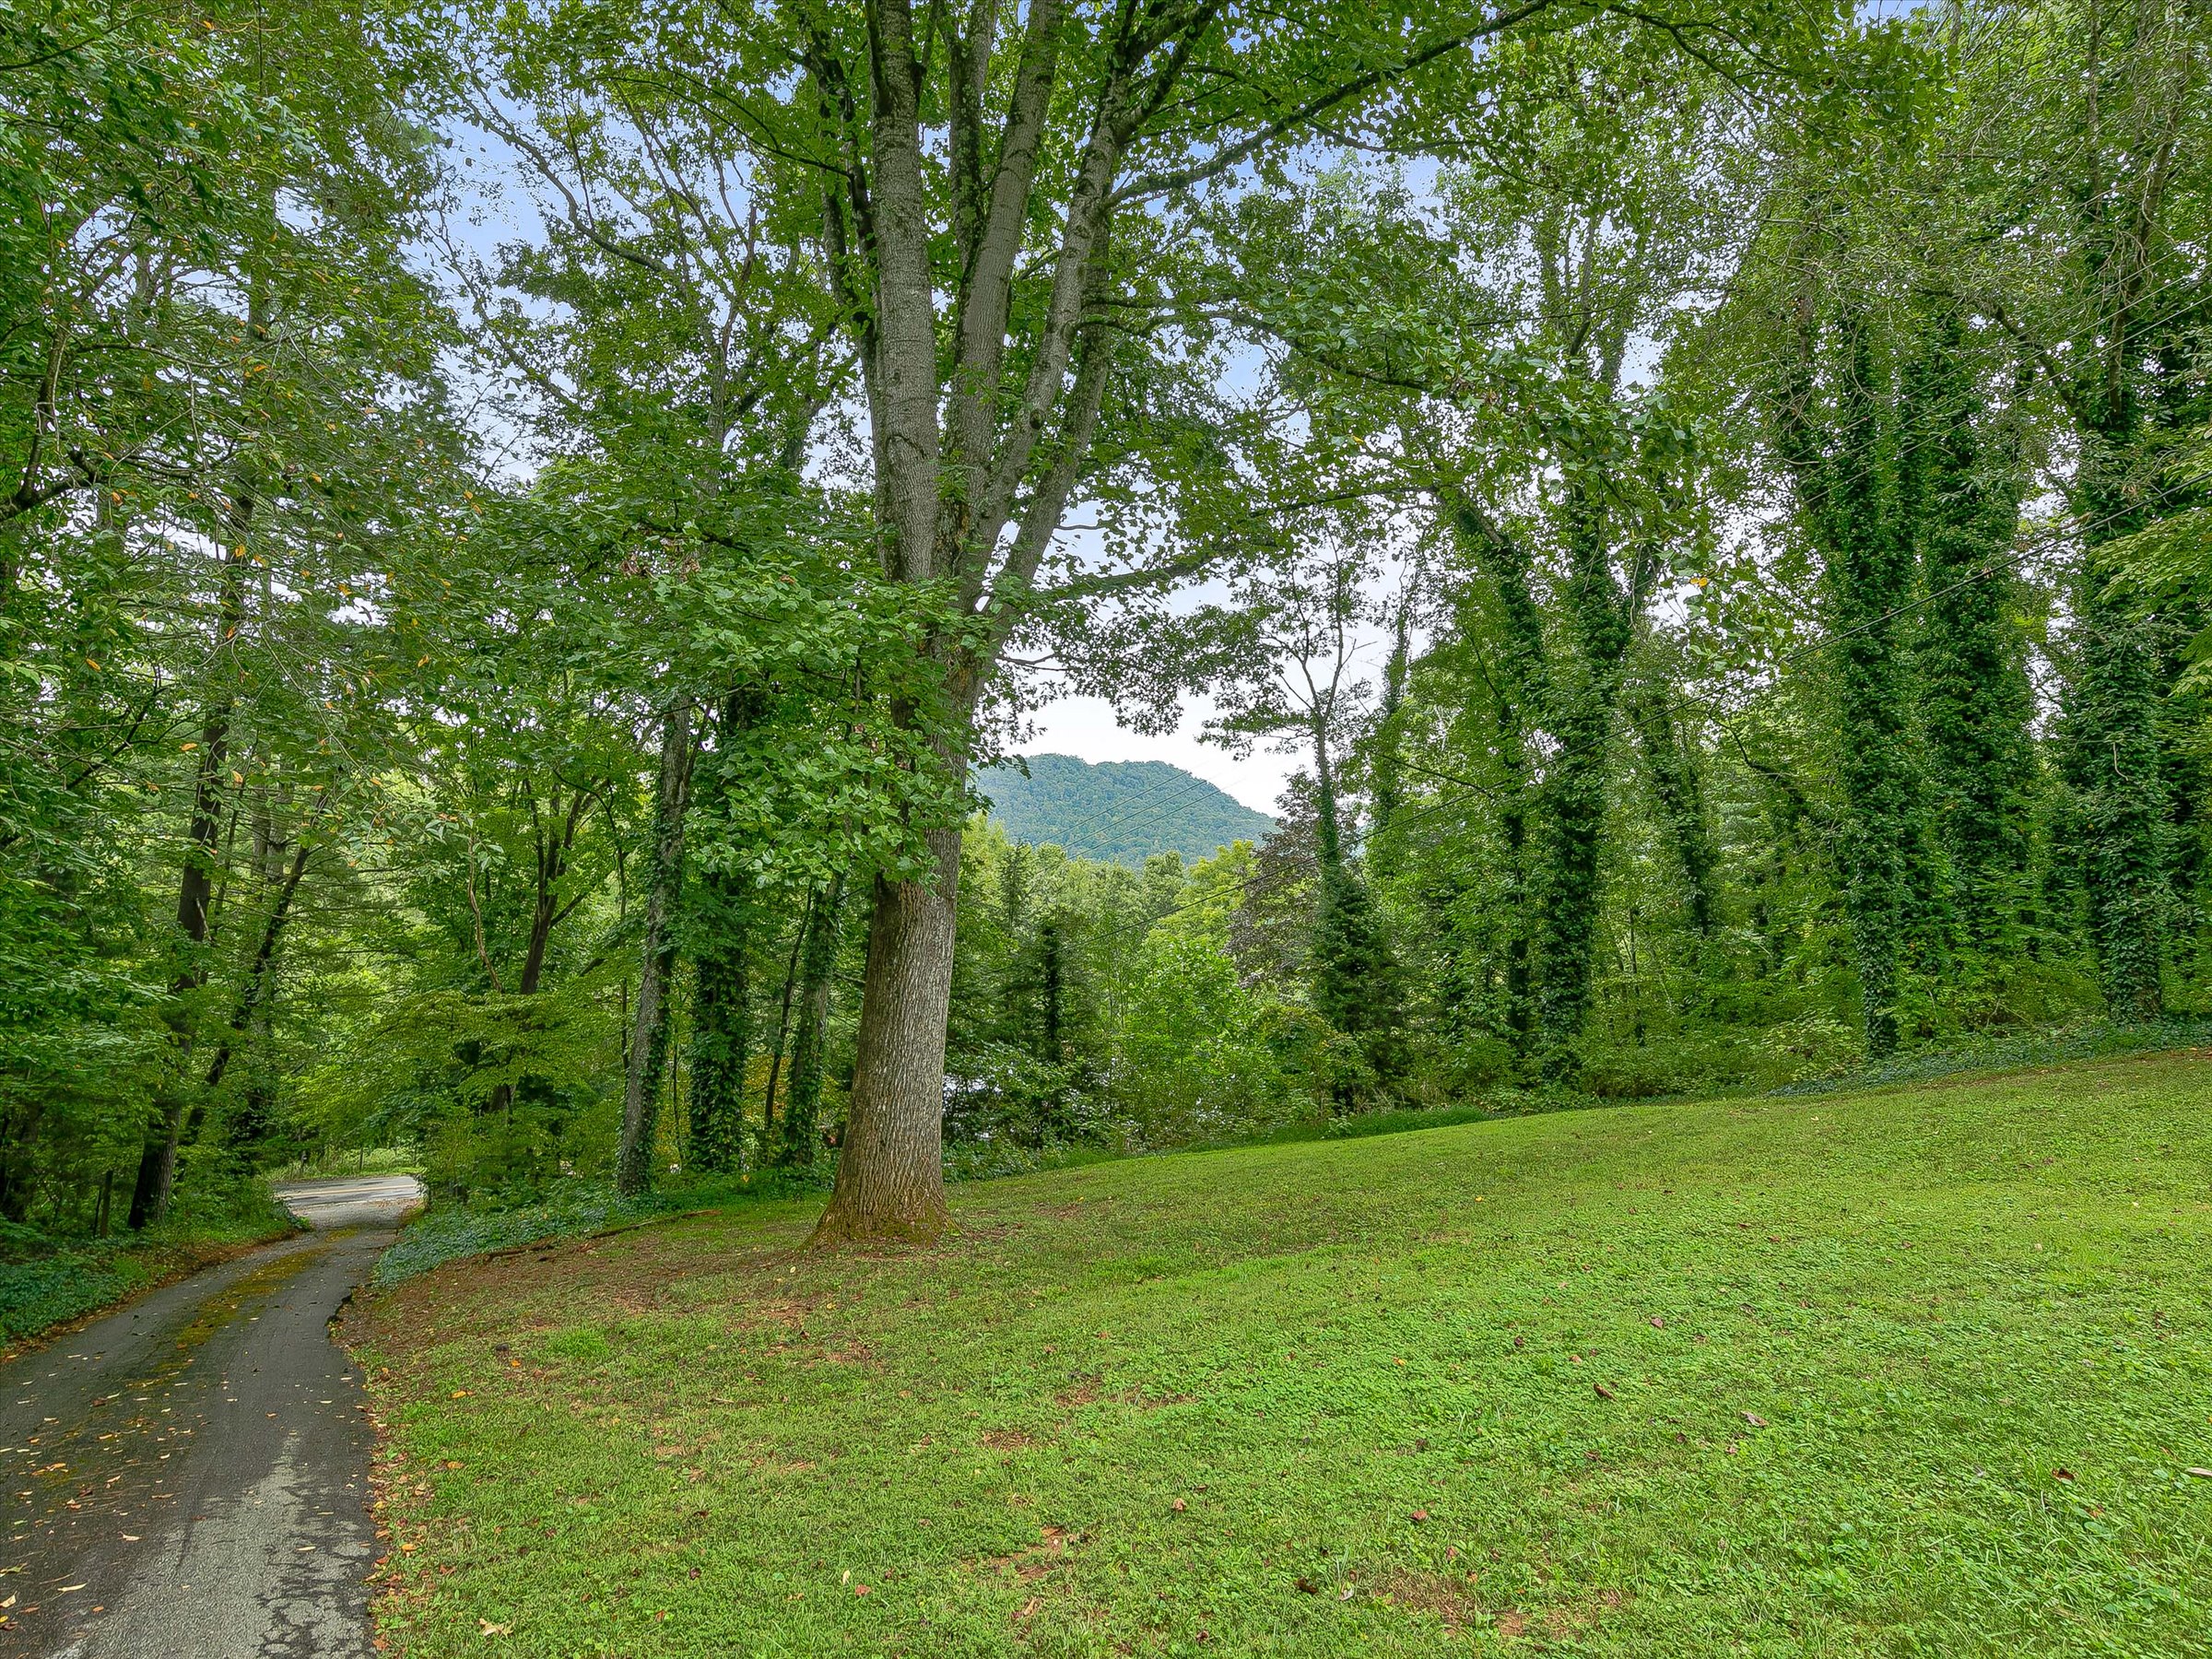 Charming House for Sale in Swannanoa on Large Private Lot